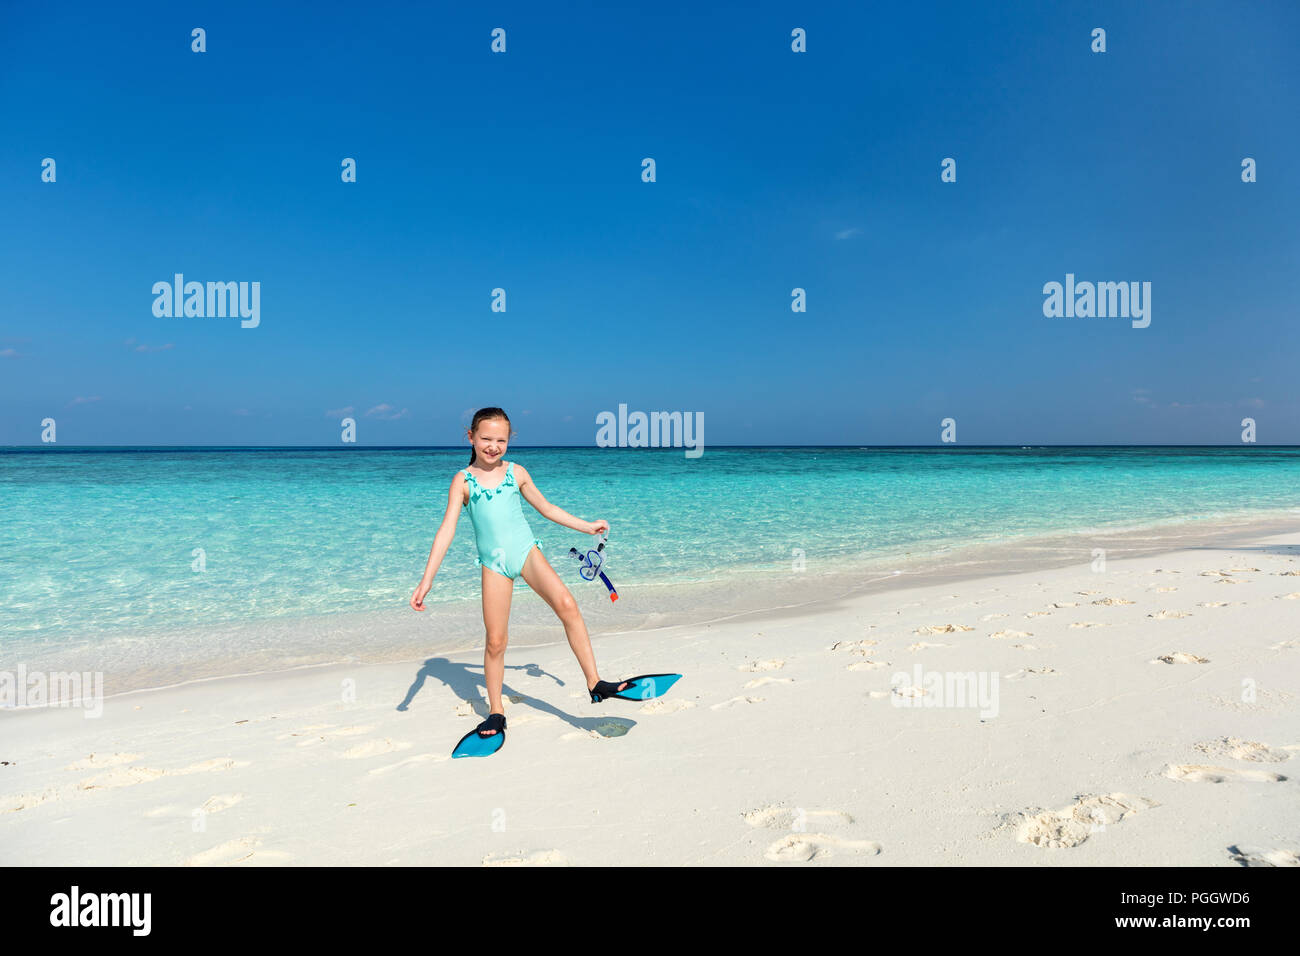 Adorable little girl with snorkeling equipment at beach during summer vacation Stock Photo